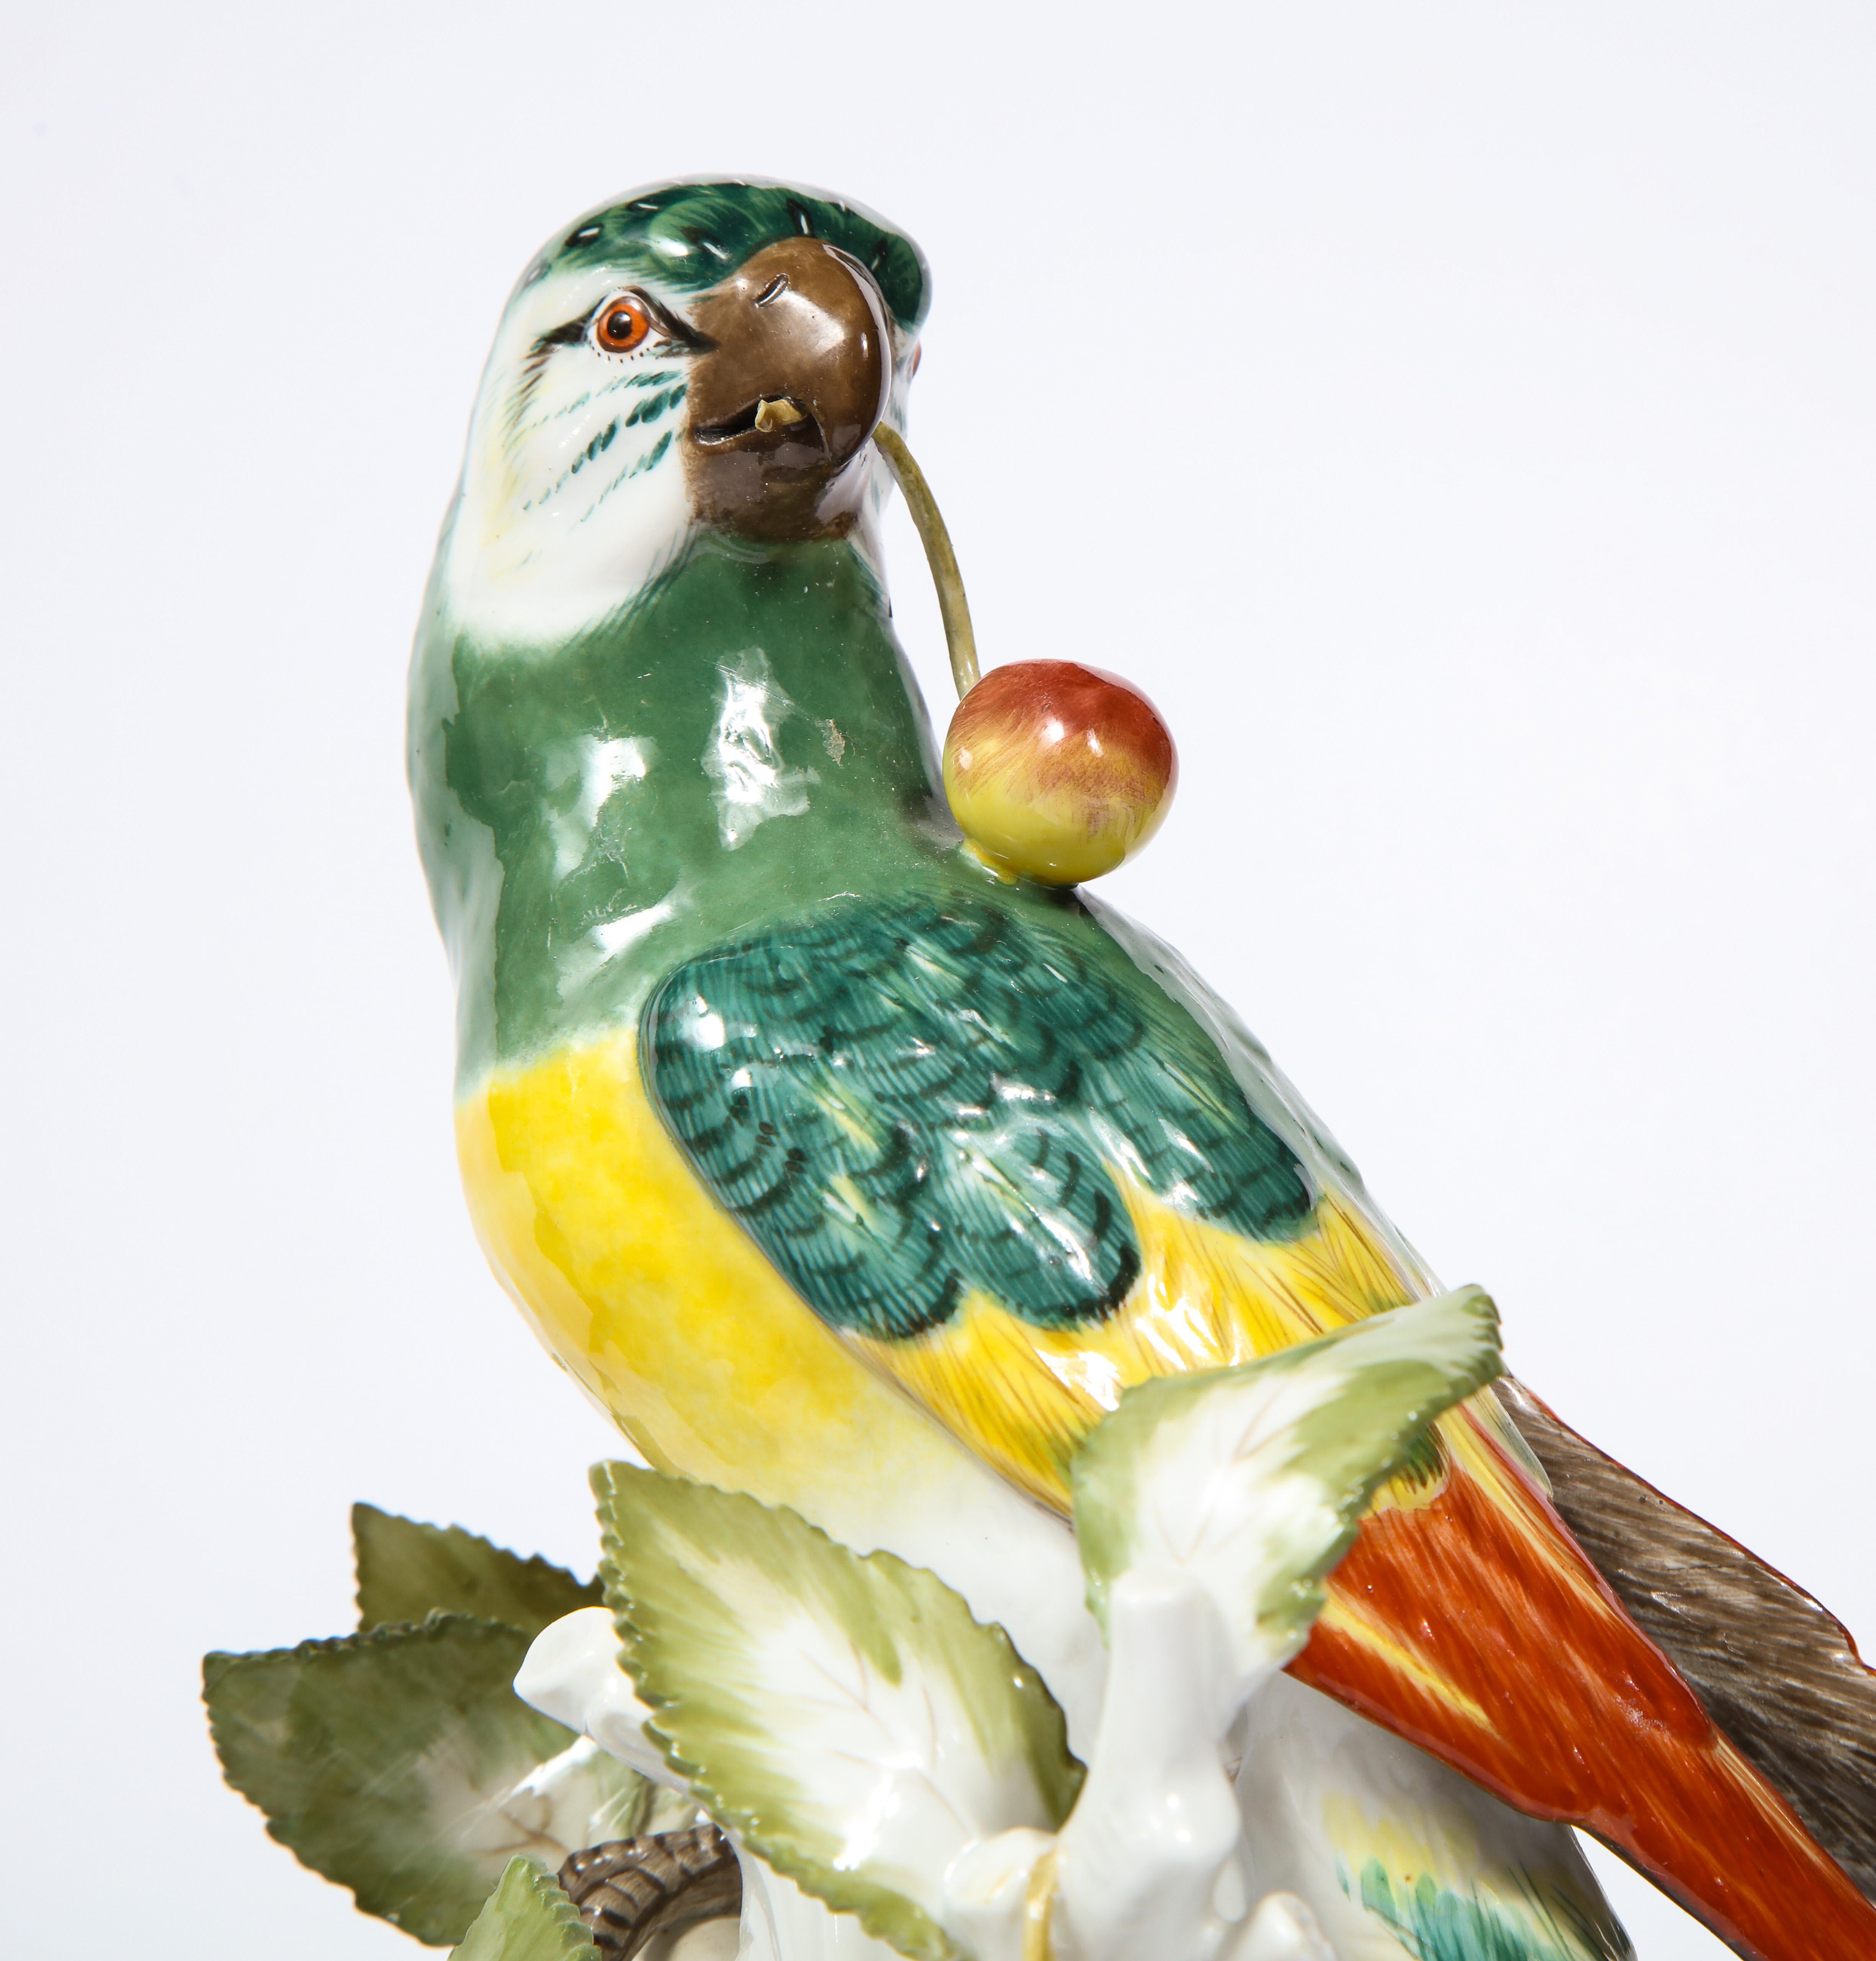 19th Century Pair of Meissen Porcelain Figures of Parrots with Cherries, Insects and Flowers